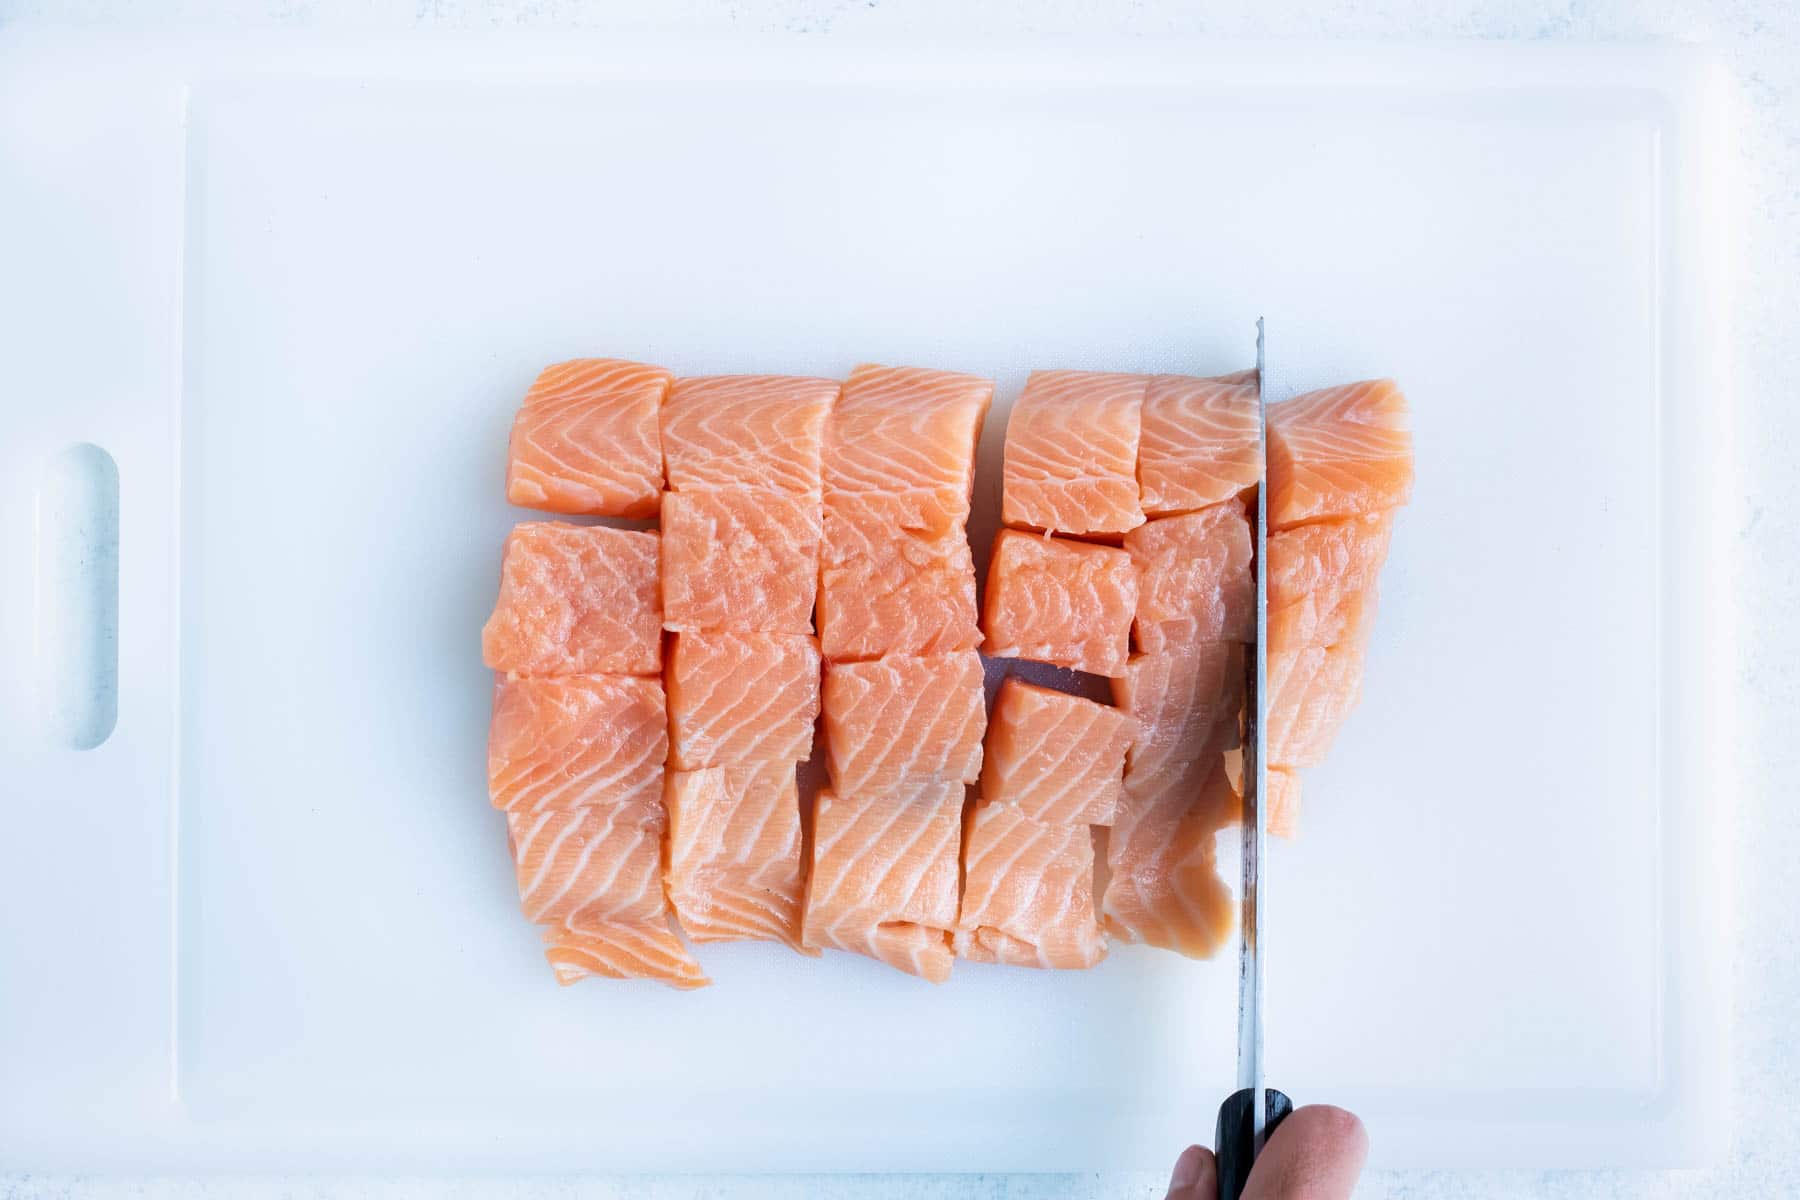 The fresh salmon is cubed with a knife.